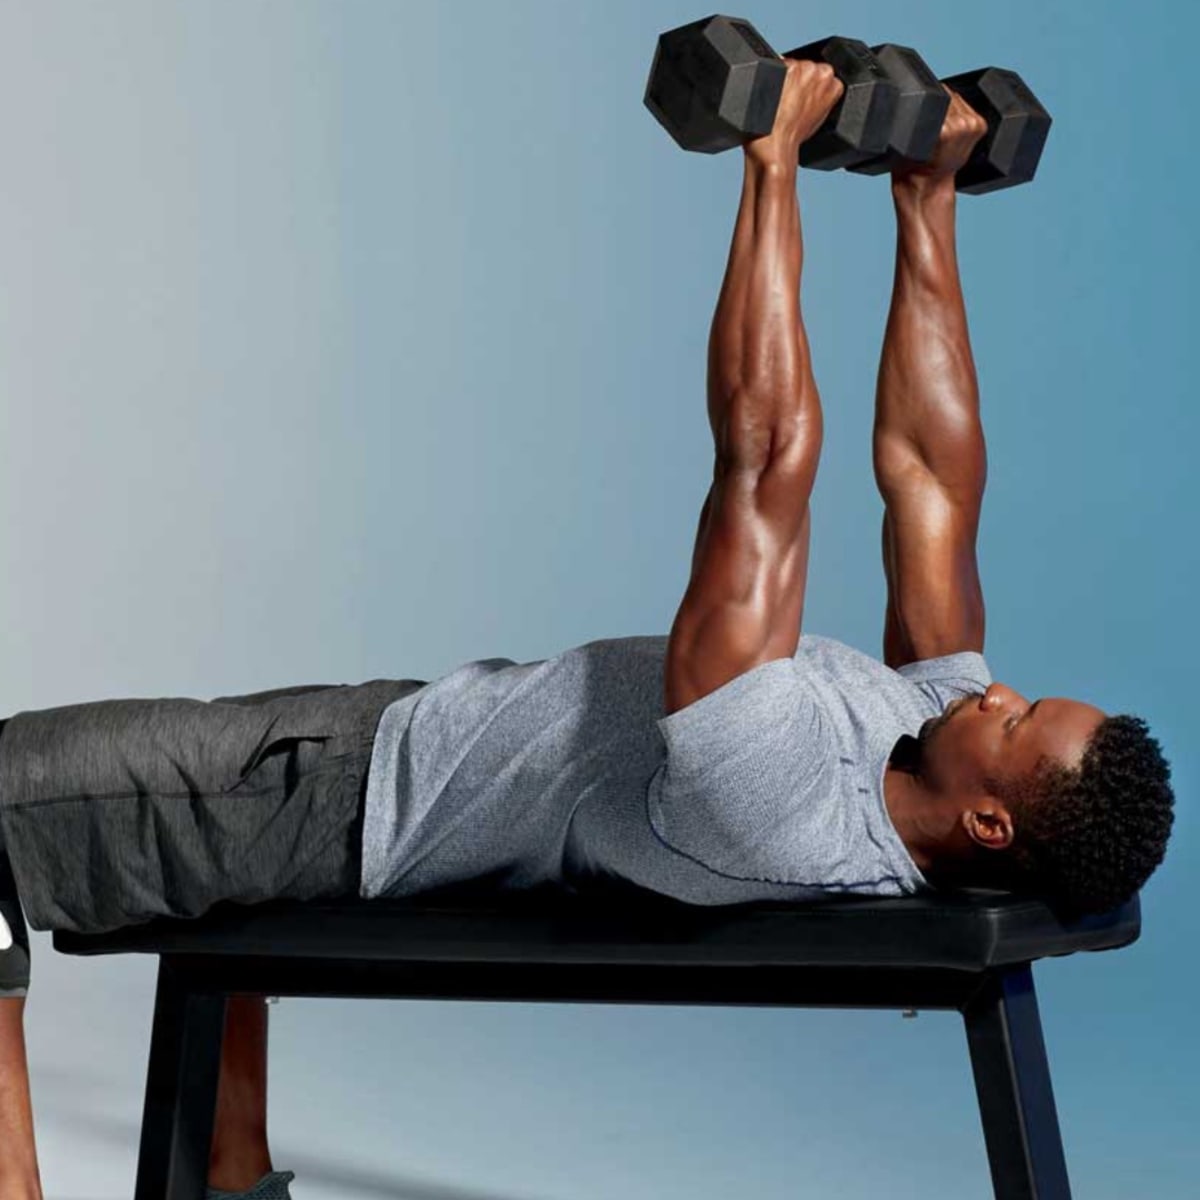 How To Do Dumbbell Tricep Kickback: Step-by-Step Guide